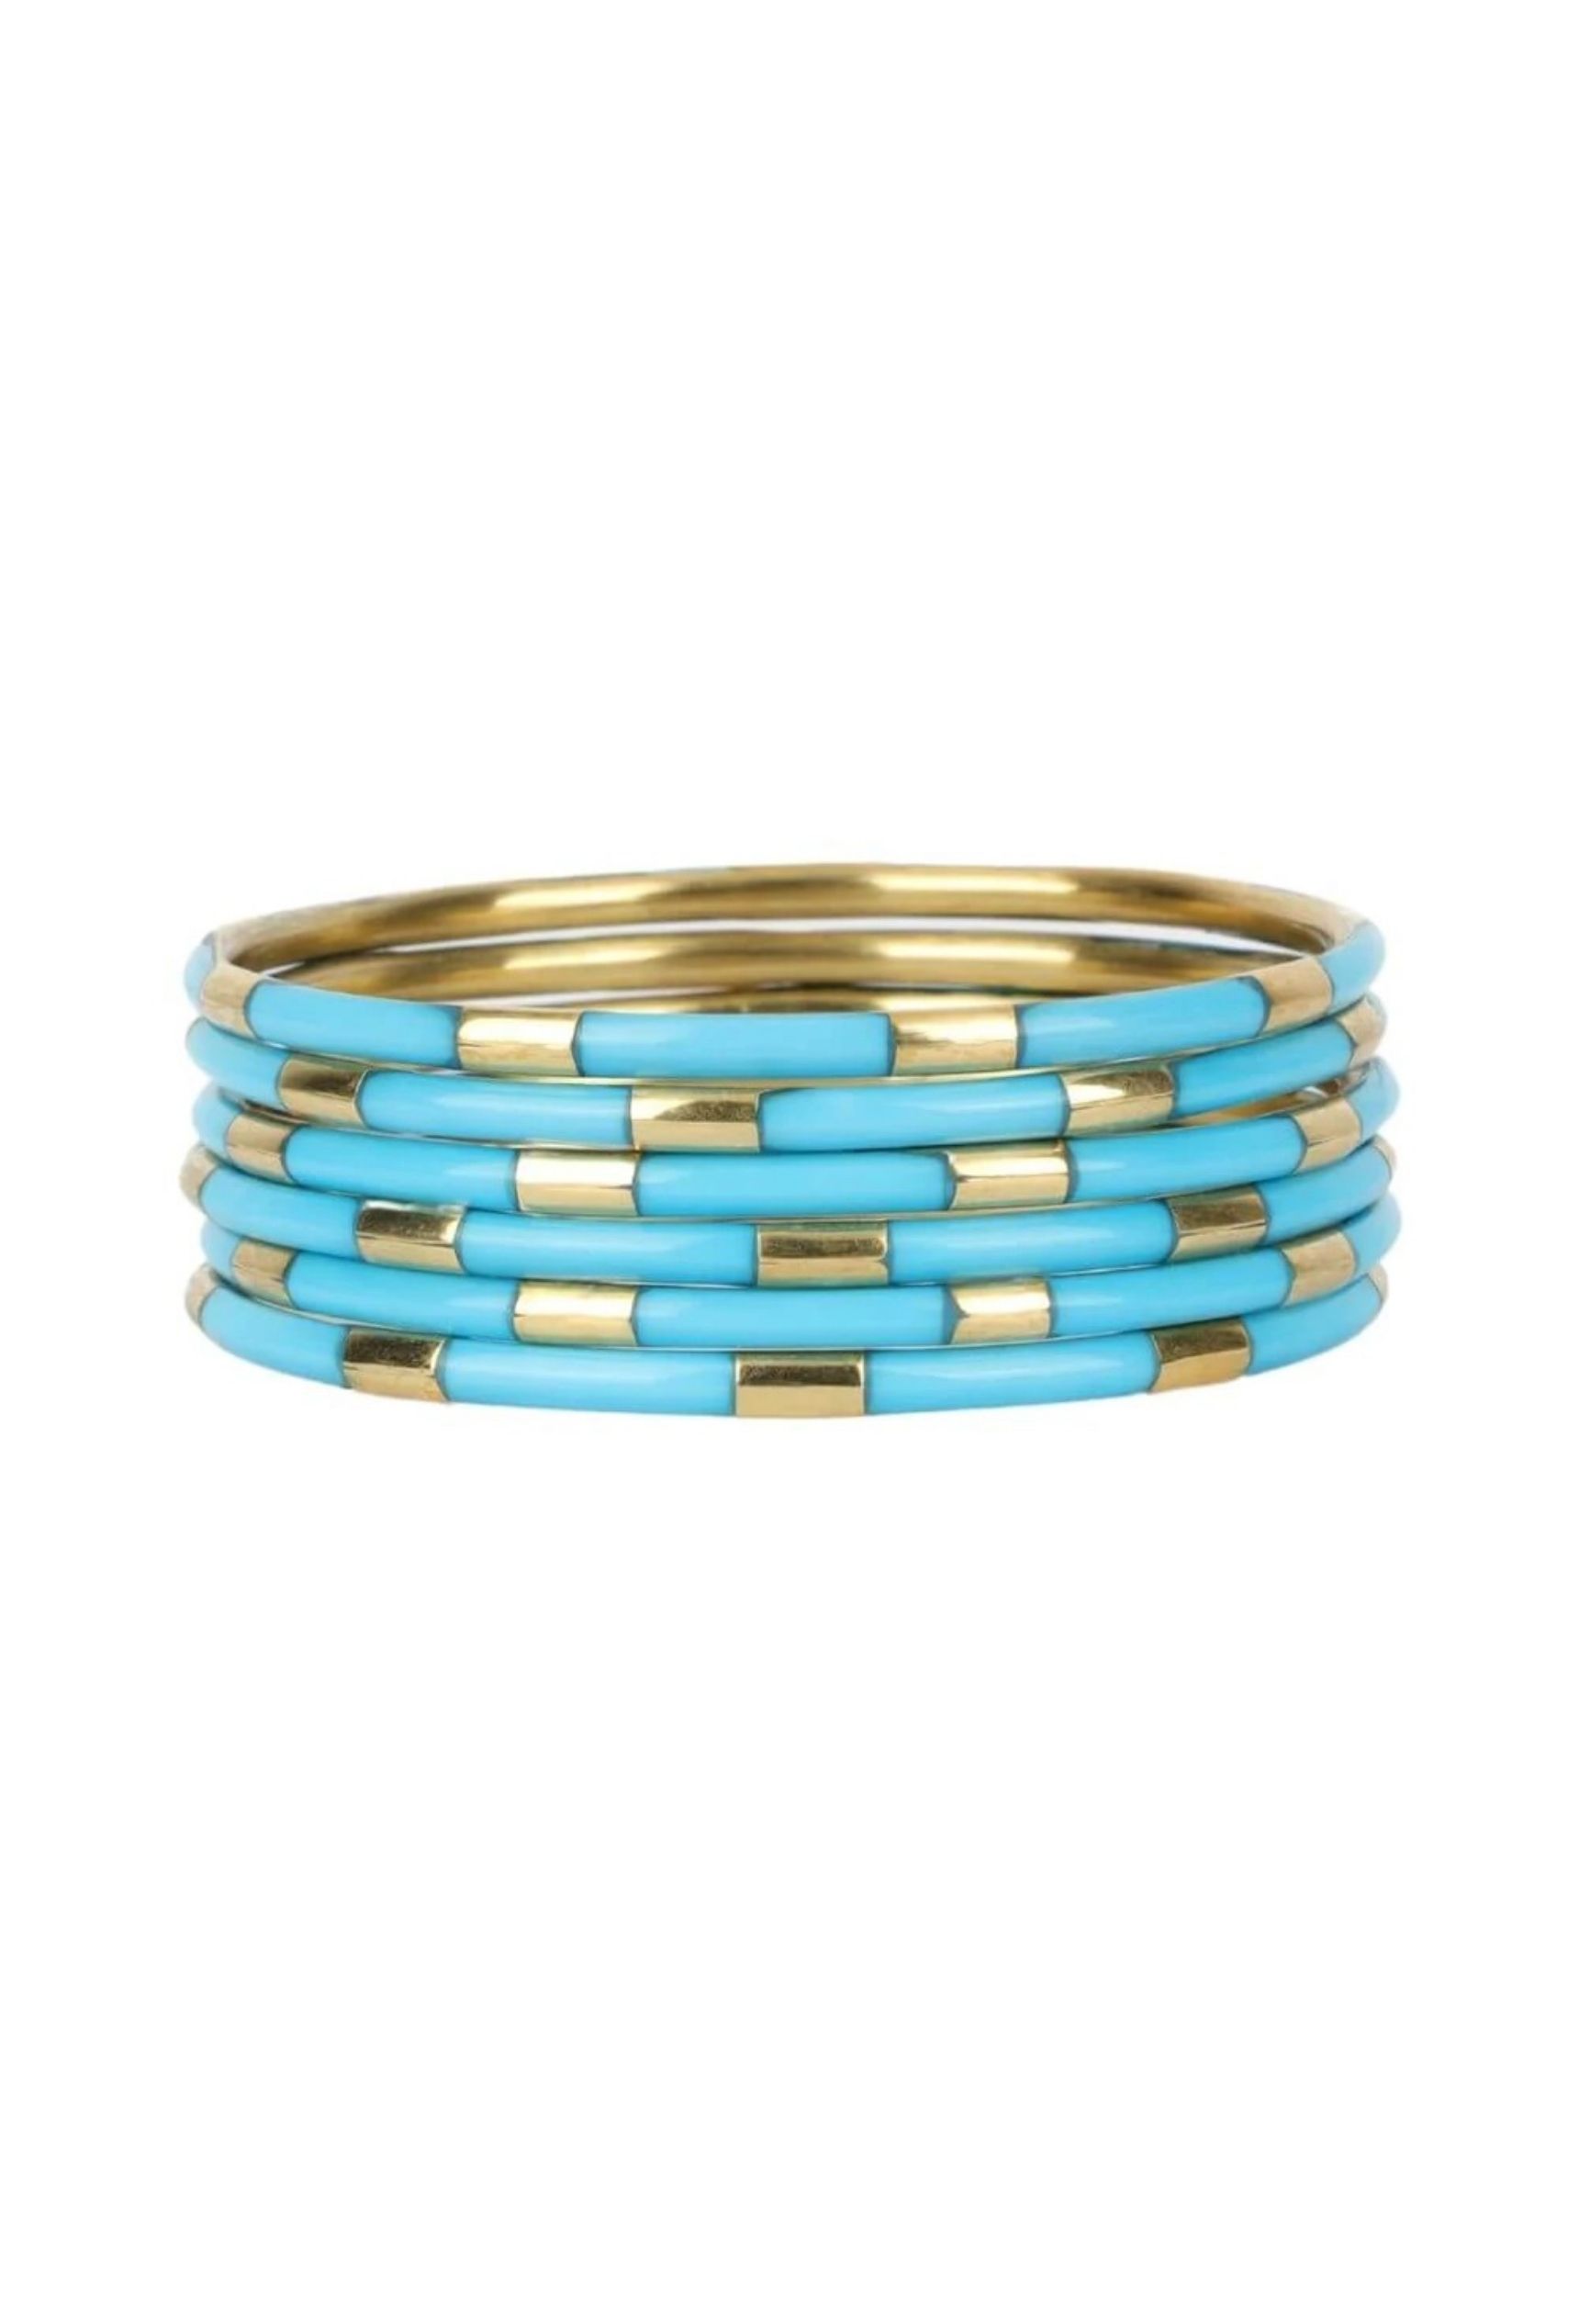 BUDHAGIRL Veda Bracelet Set in Turquoise, set of 6 bangles, Turquoise with gold detailing